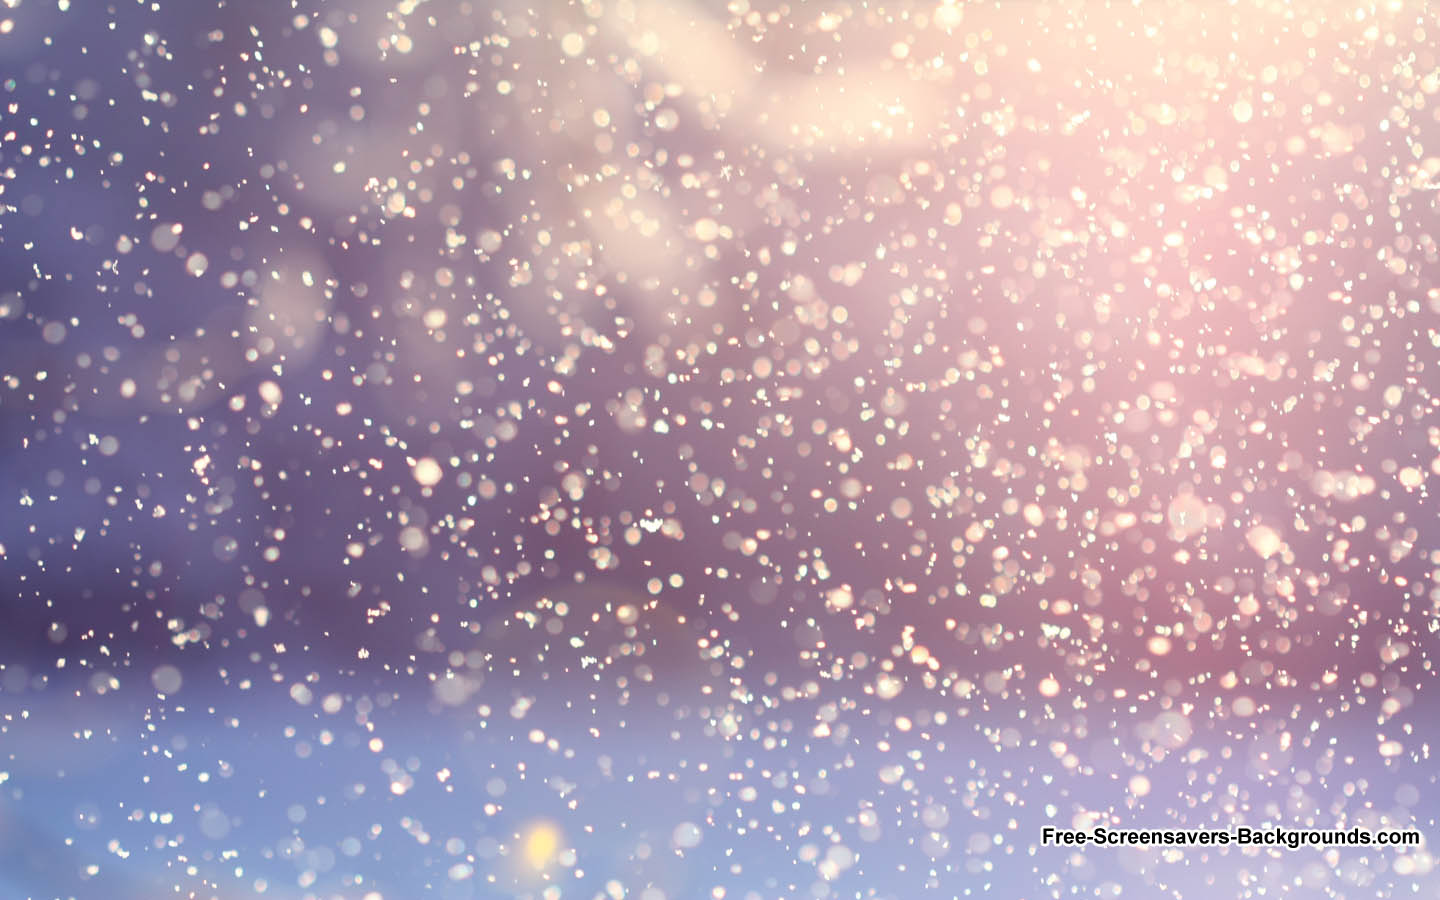 Winter Snow Screensavers And Background